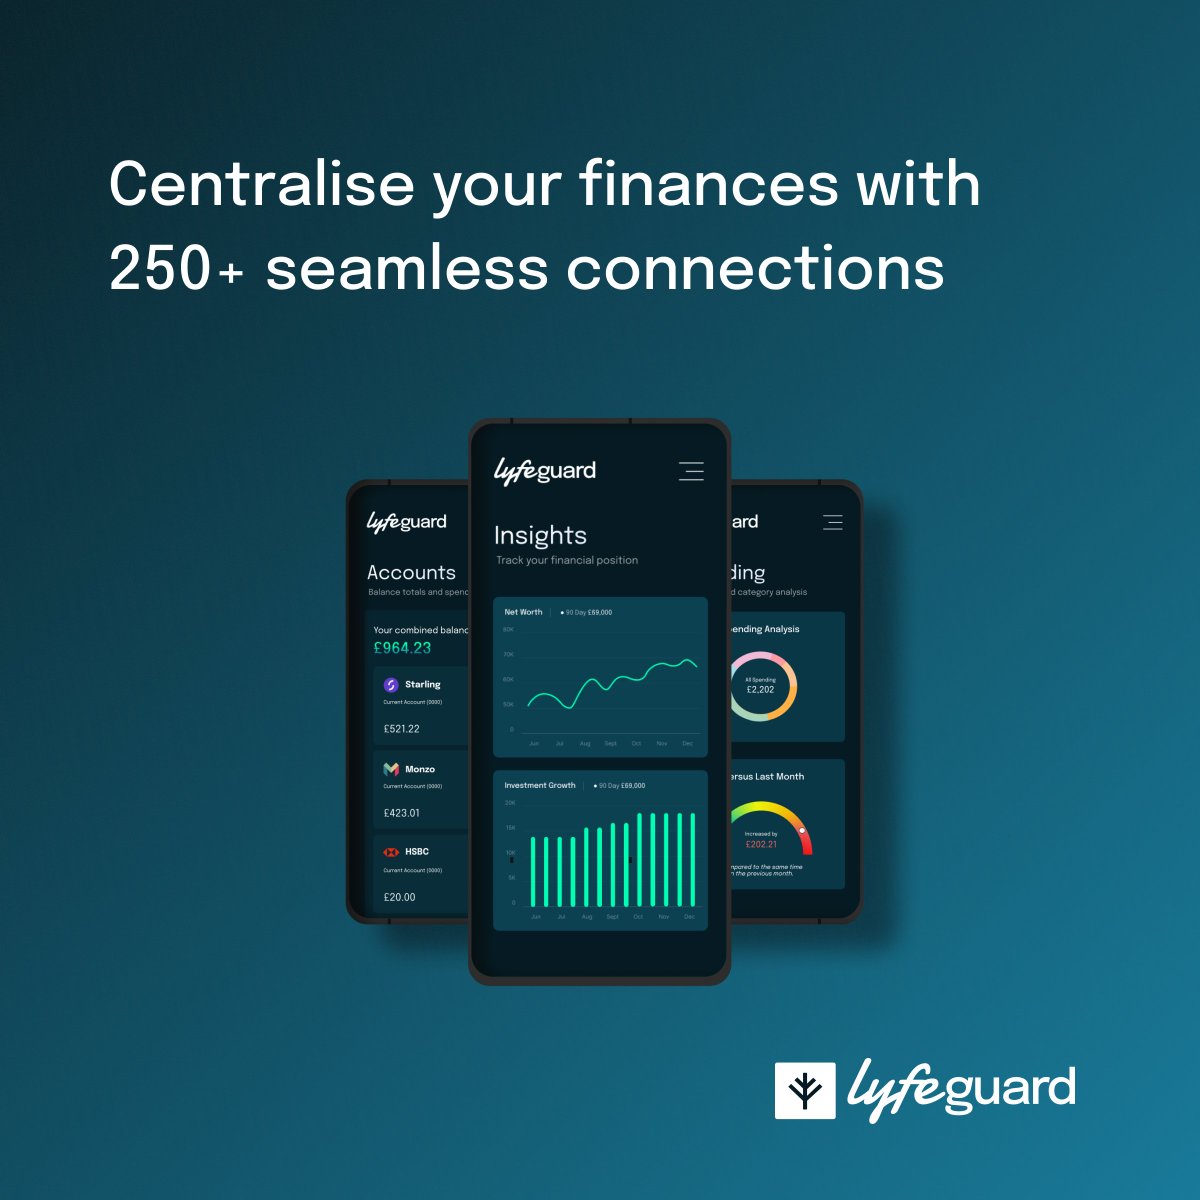 Discover the power of connection with Lyfeguard. Simplify your financial world with over 250 connections that bring clarity to your finances. 

Find out more at bit.ly/4aX6vLL

#FinancialClarity #PersonalFinance